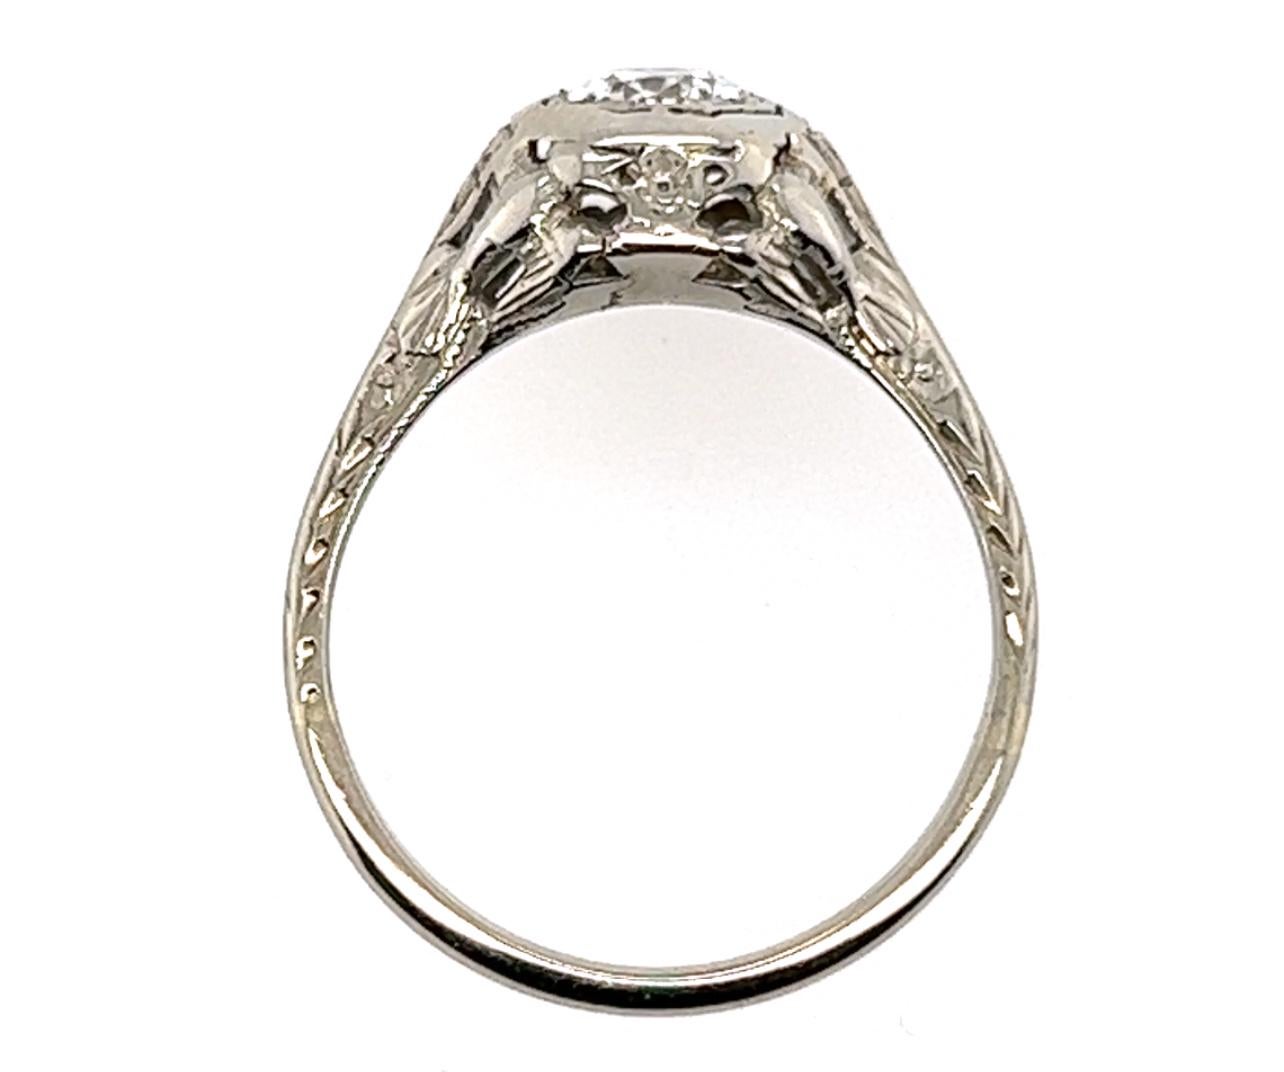 Genuine Original Art Deco from the 1930's GIA Certified .54ct Diamond Lovebird 18K White Gold Engagement Ring



Featuring a High Quality GIA Certified .54ct H-VS2 Genuine Old European Cut Natural Mined Diamond Center

Check Out the Hand Carved